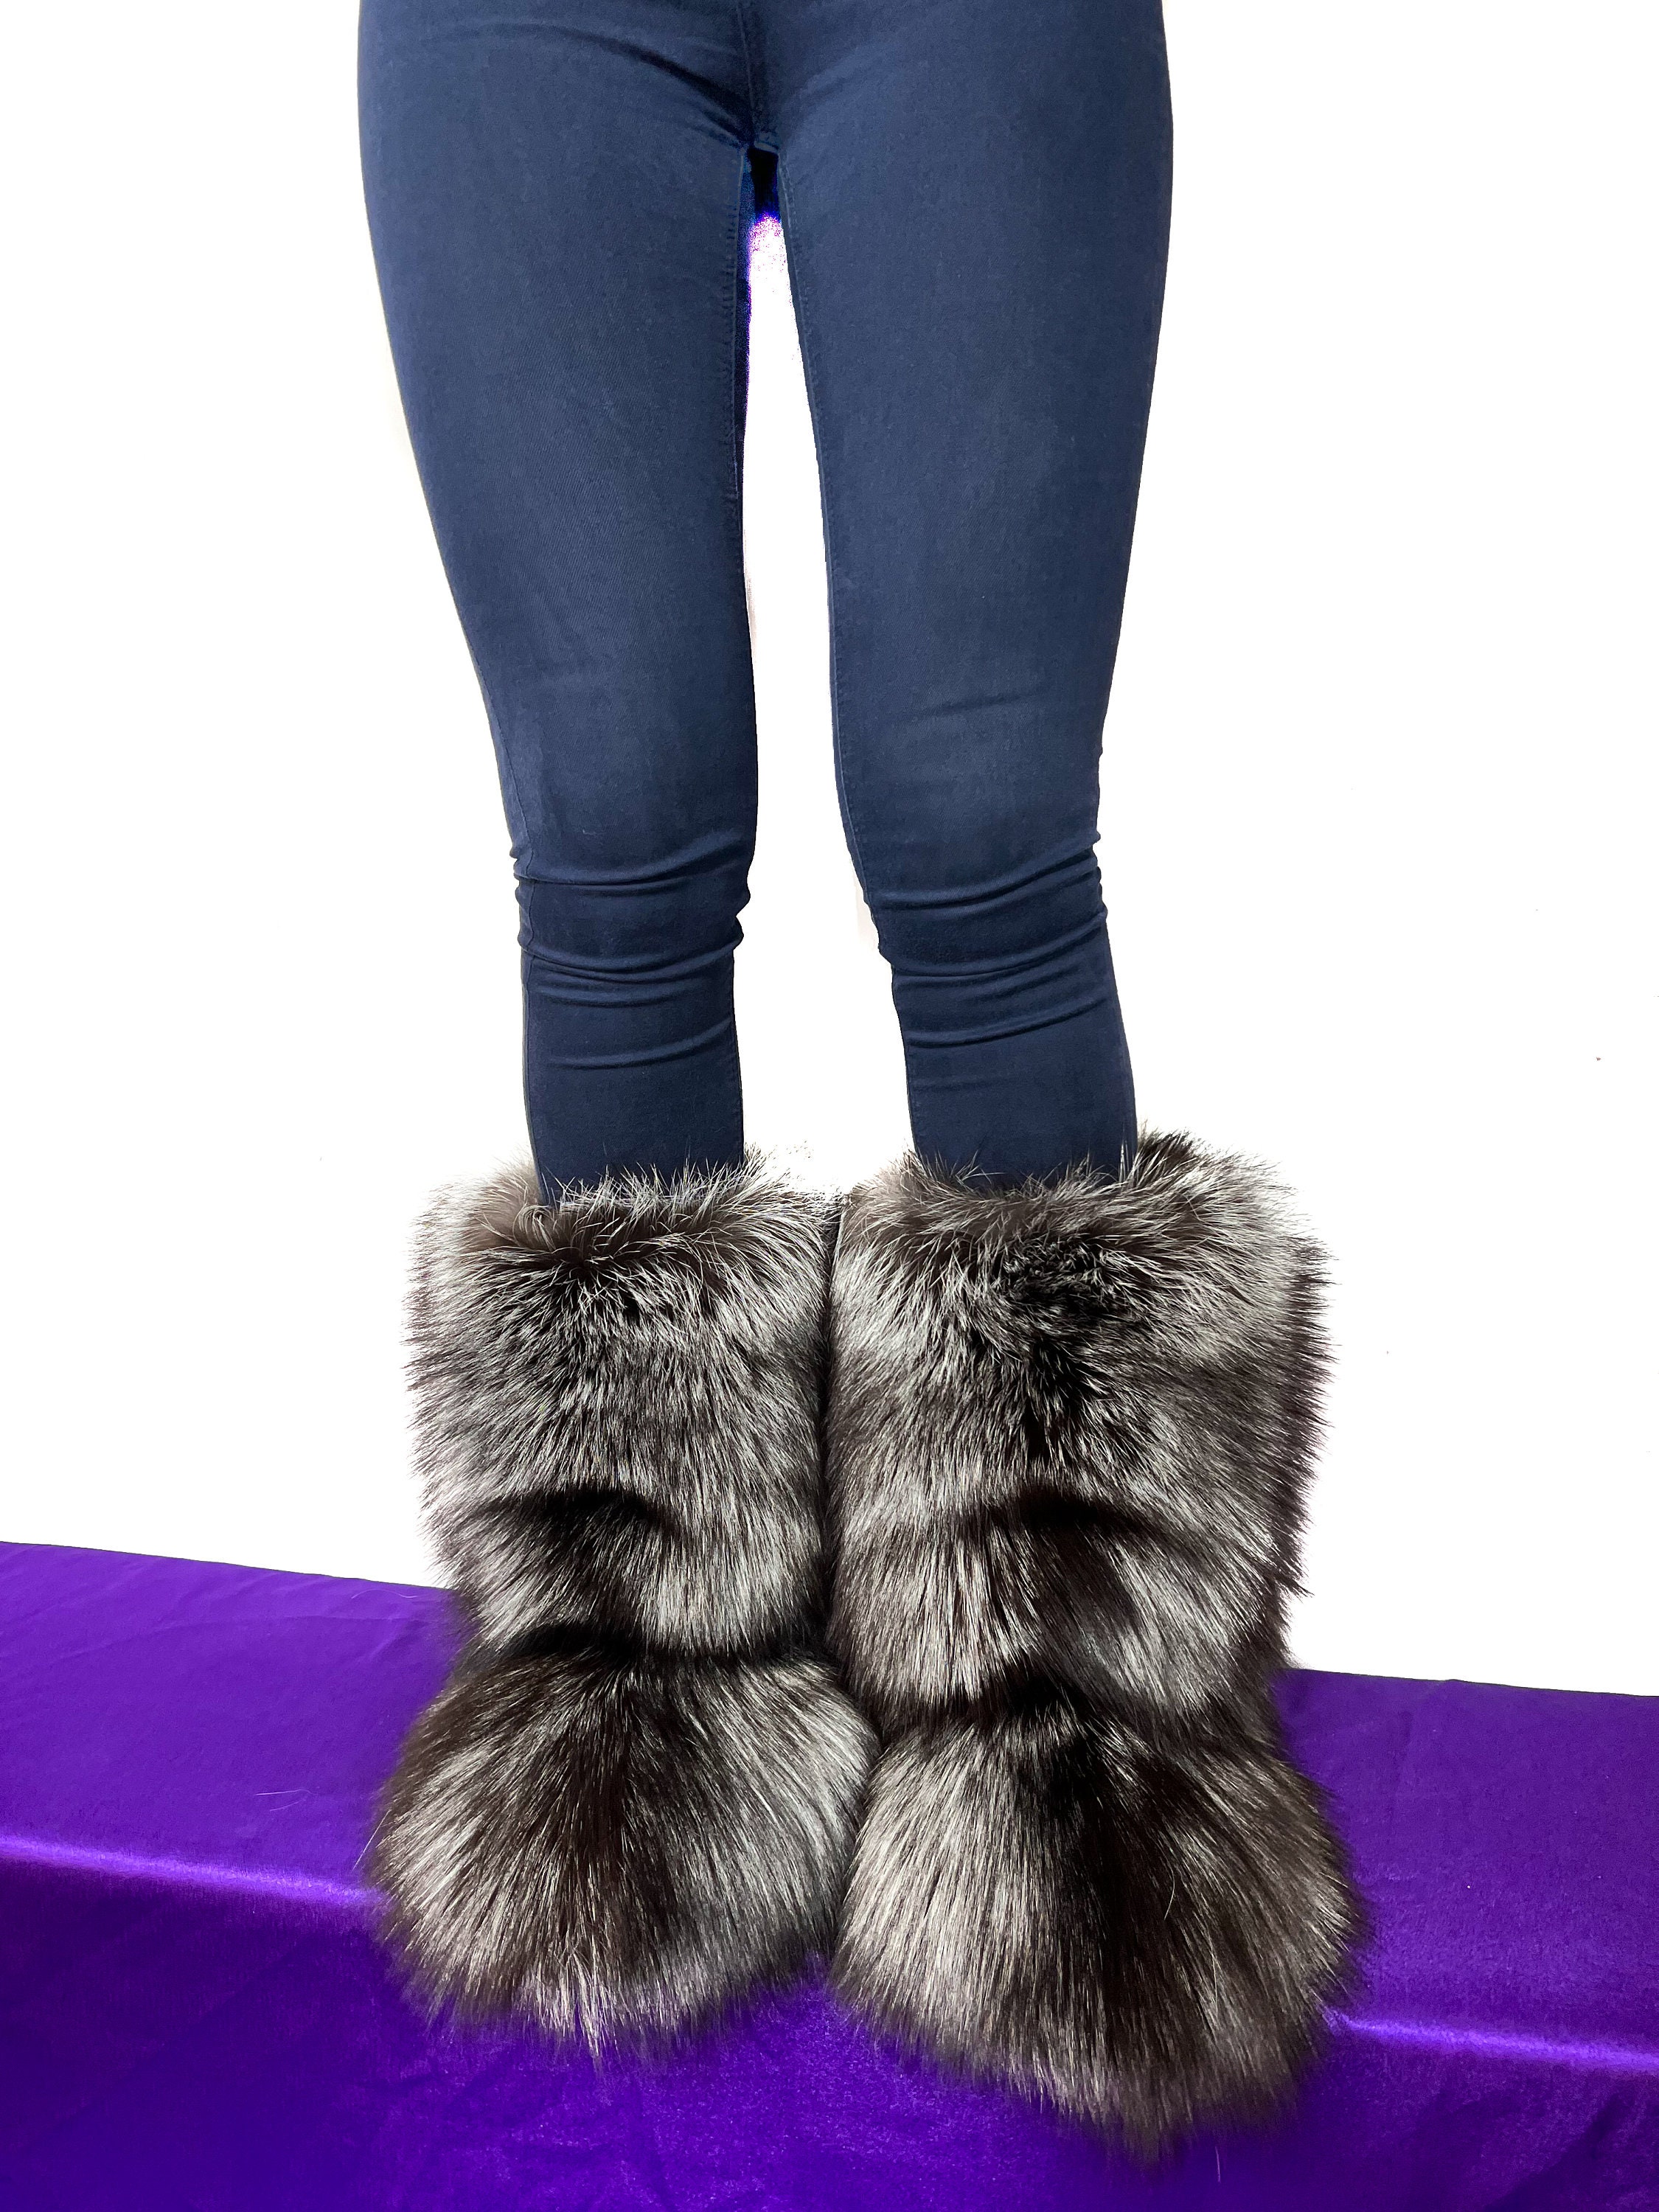 Double-sided Silver Fox Fur Boots for Indoor & Outdoor Natural Colors Fur  Shoes All Inside Lined in Fur - Etsy | Stiefel